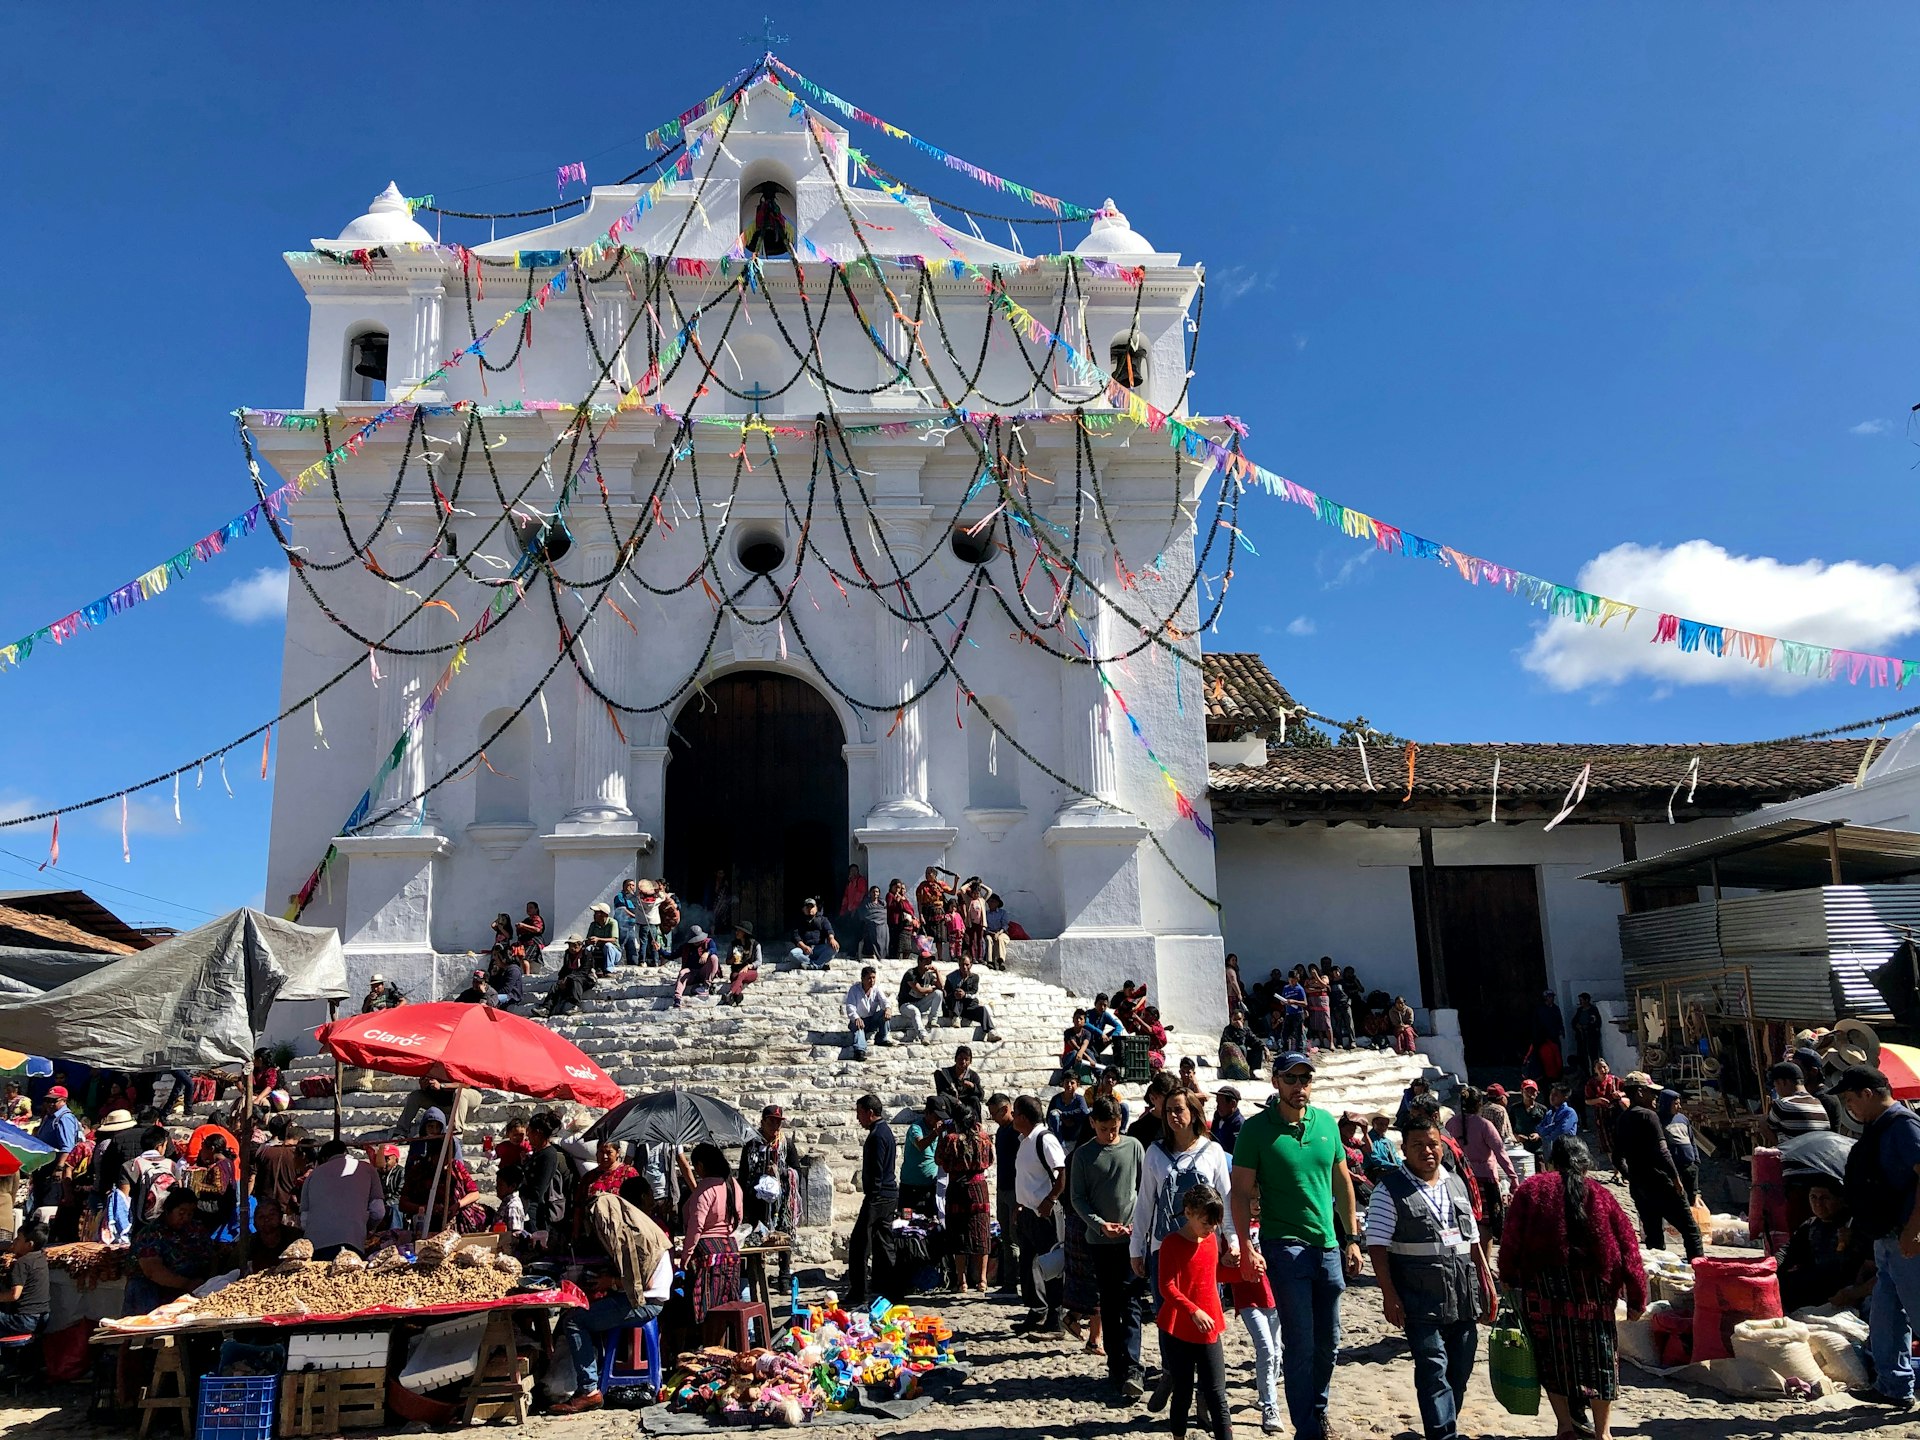 Mayan traders gather on the steps of Iglesia de Santo Tomás in Chichicastenango